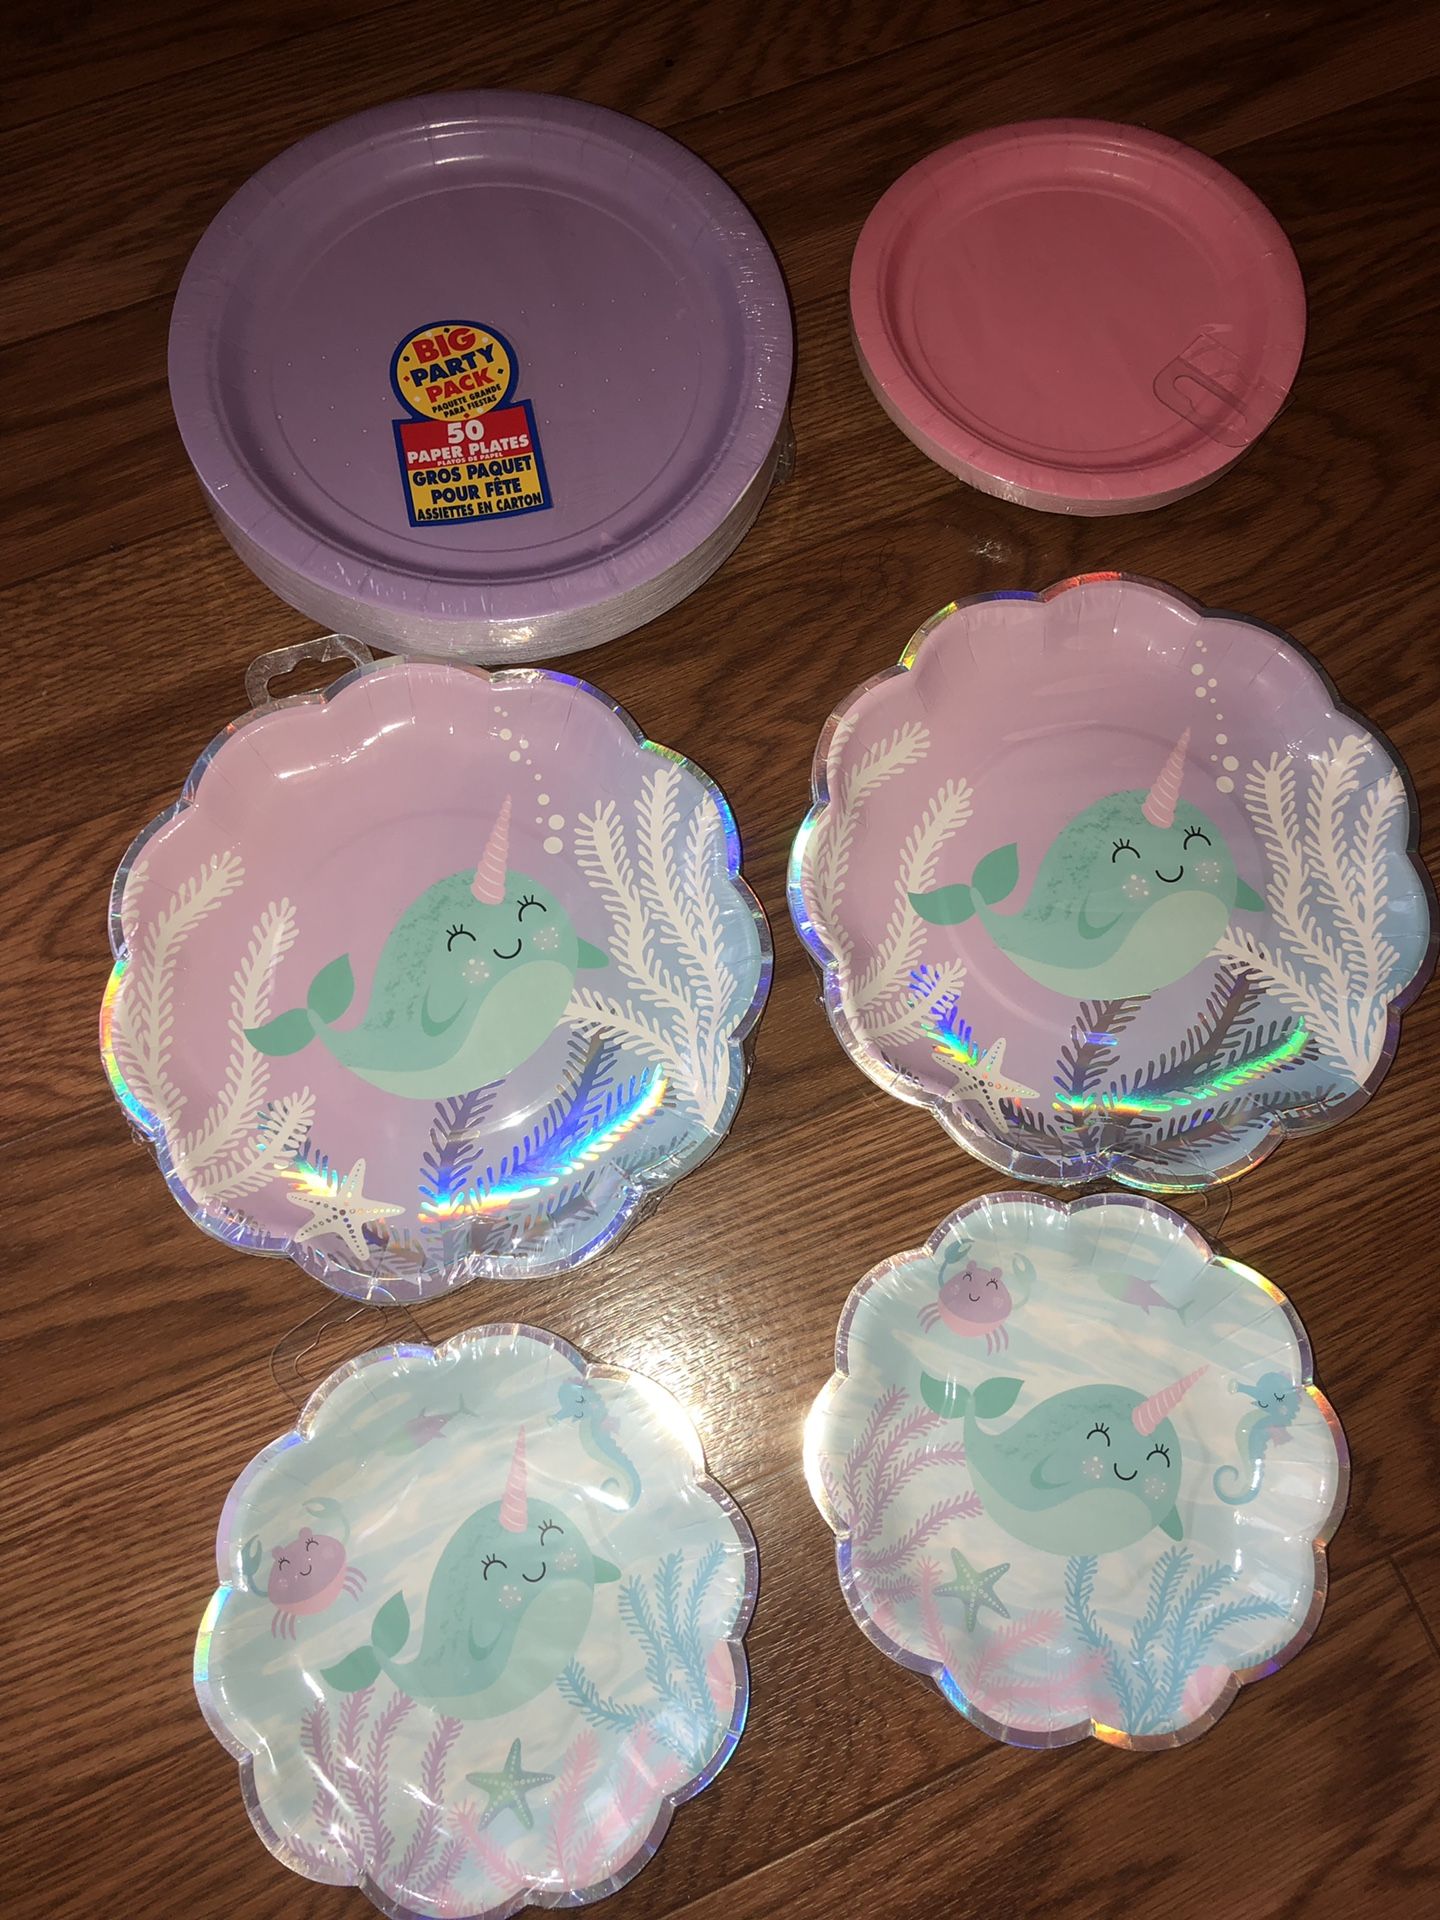 Narwhal/Mermaid party supplies!